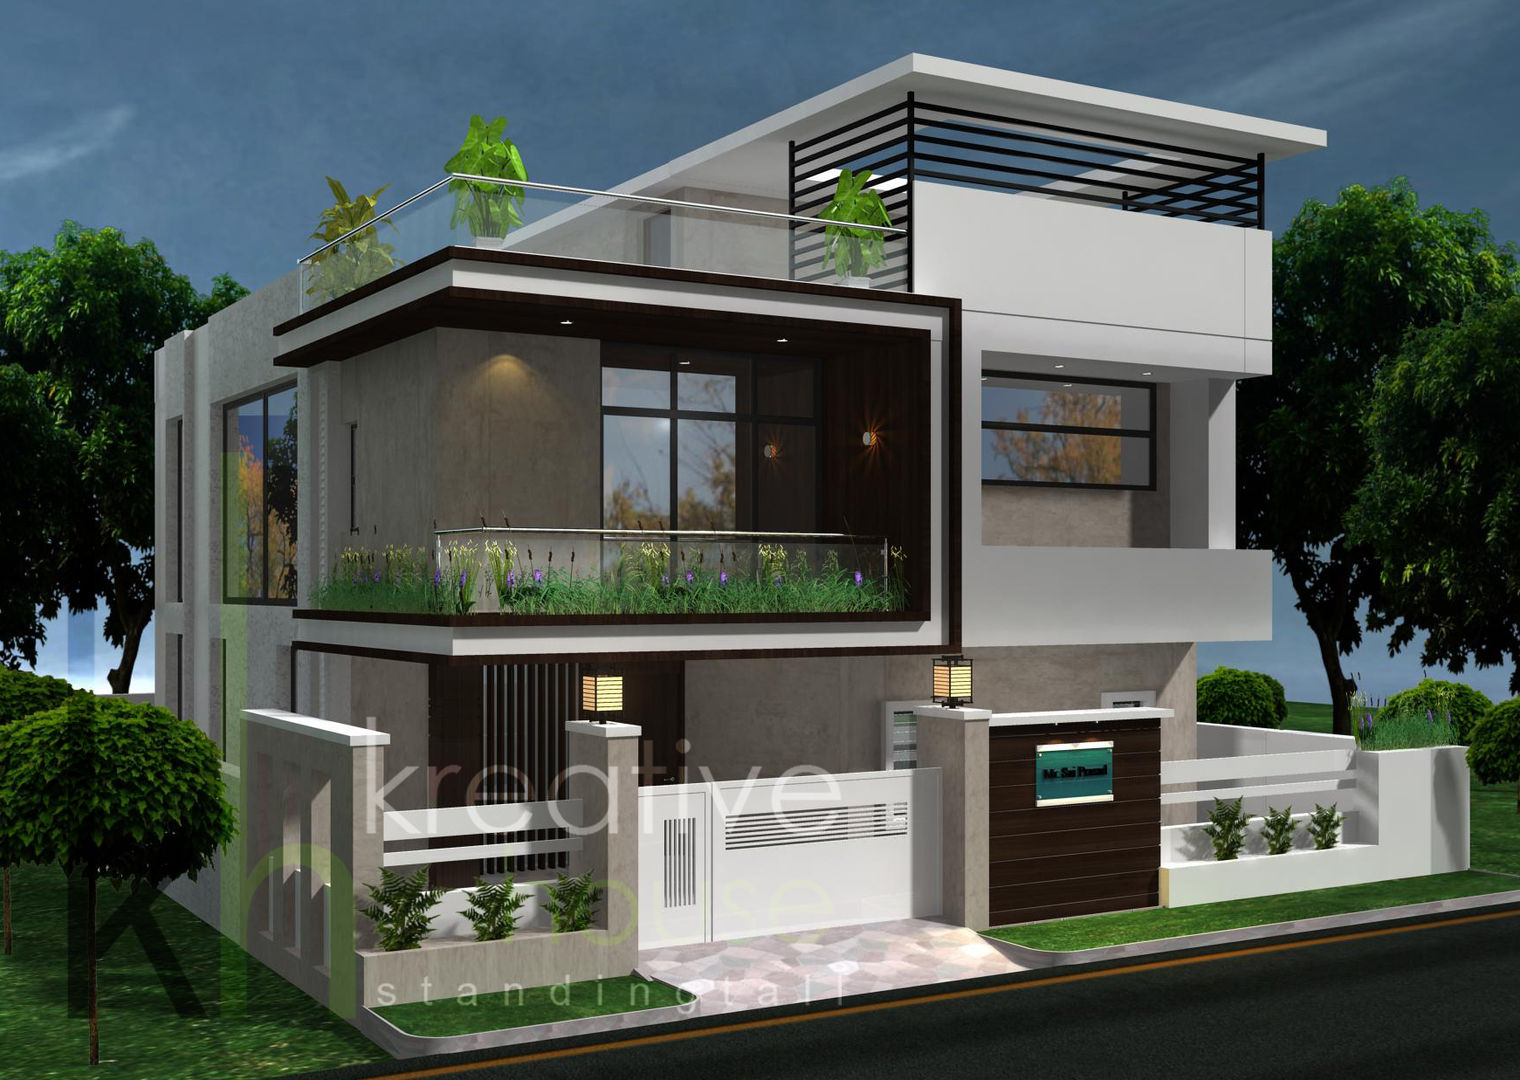 A modern home with Artistic twist KREATIVE HOUSE Modern houses Iron/Steel Property,Plant,Building,Sky,Tree,Shade,Land lot,Urban design,Window,House